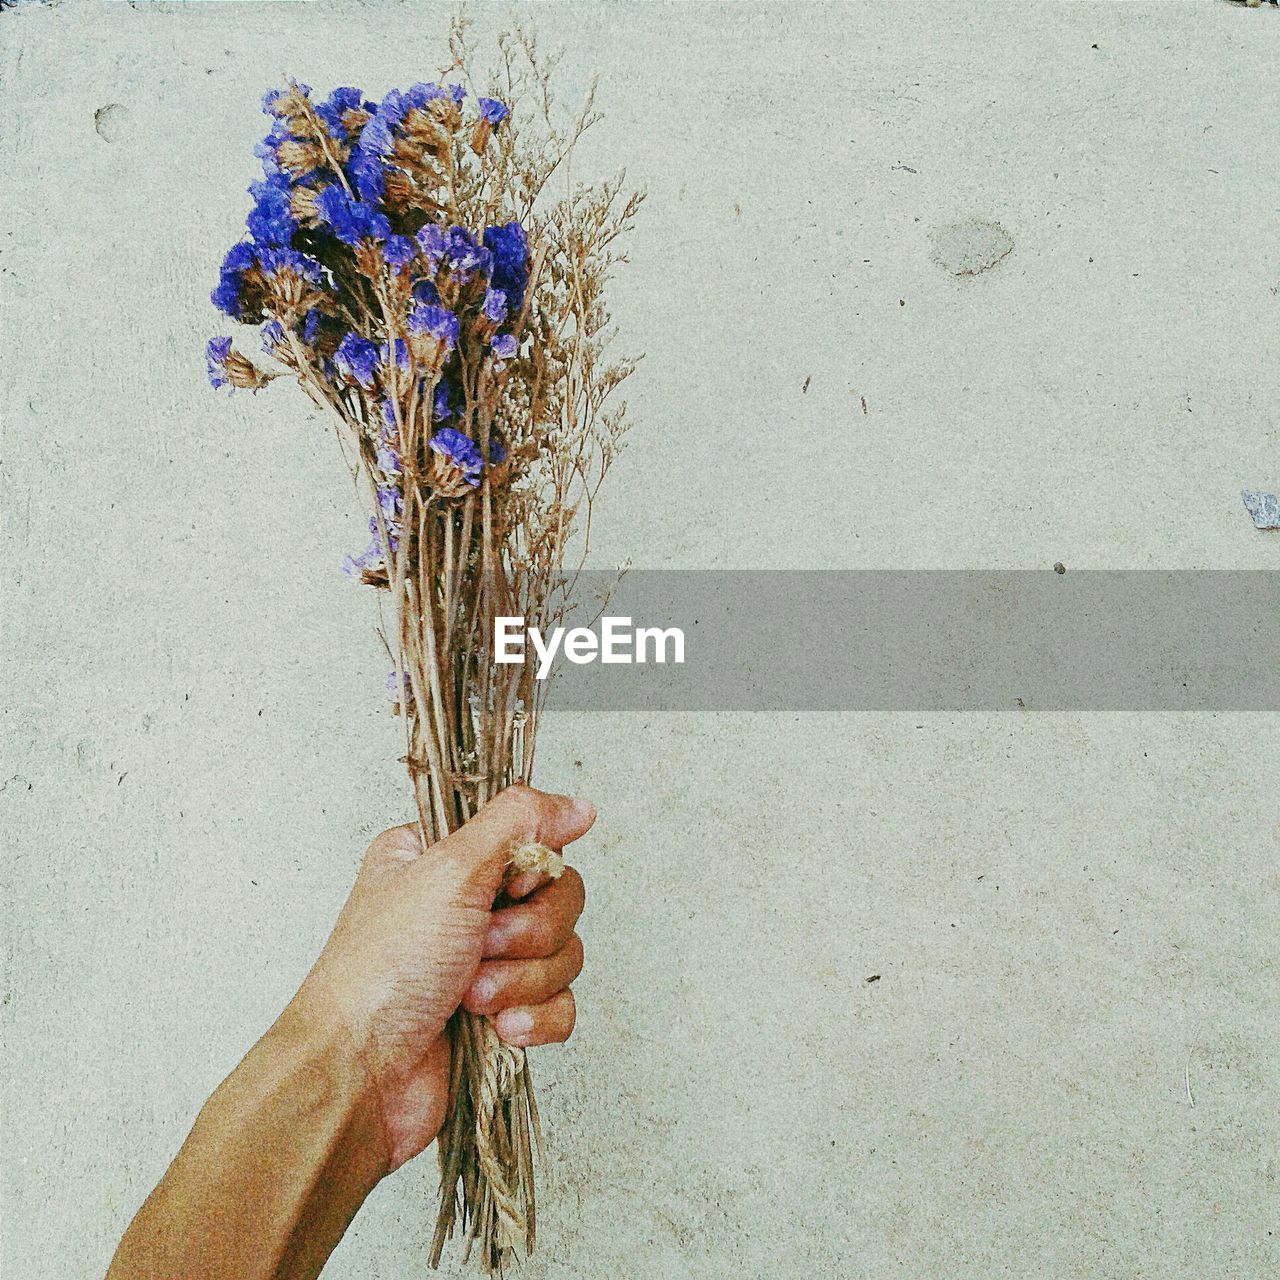 Cropped image of hand holding flowers against wall